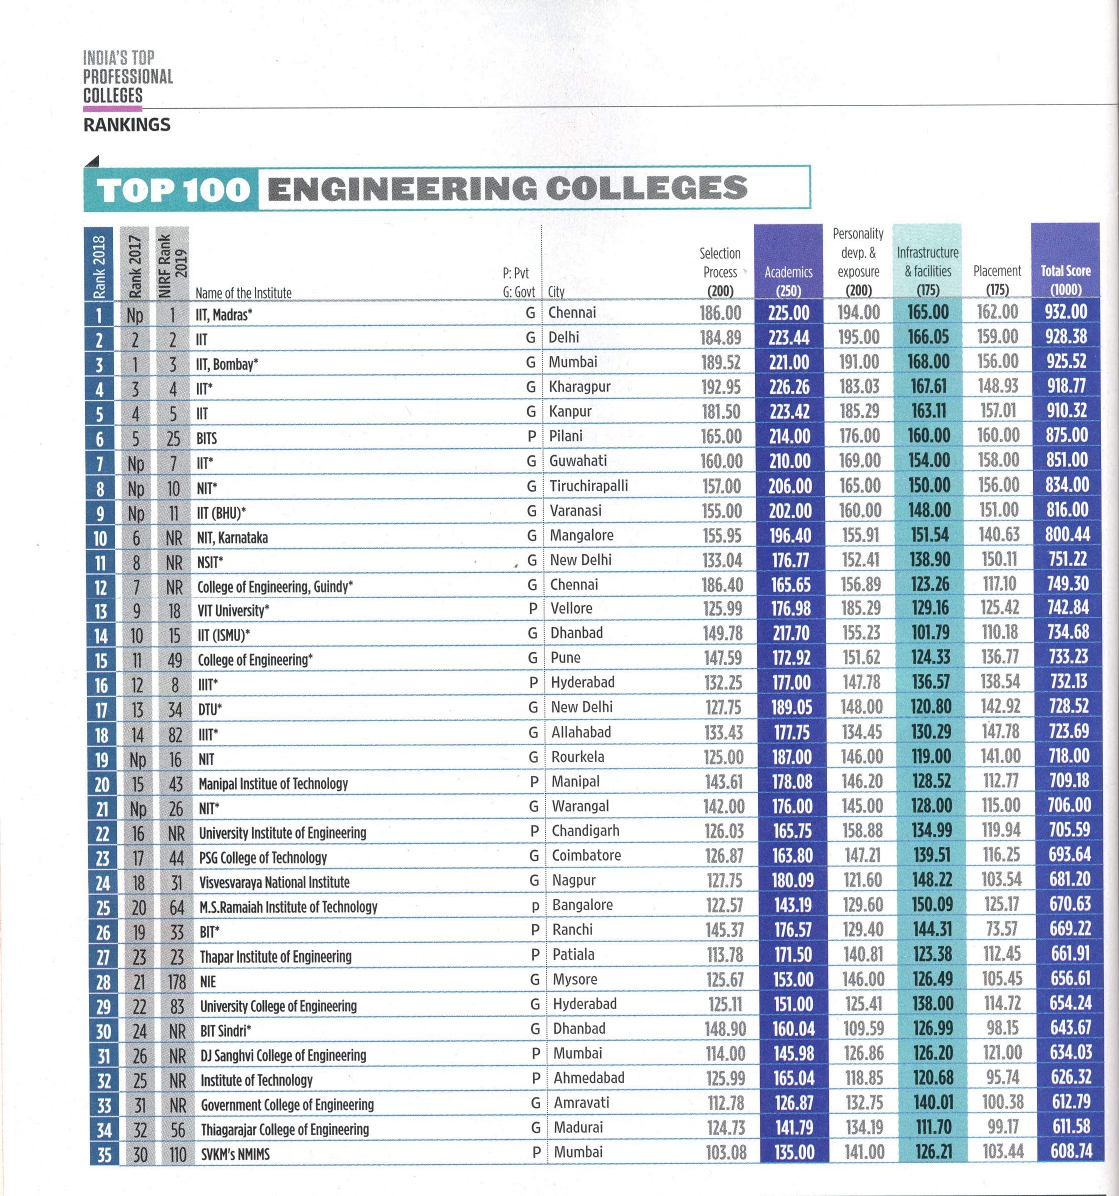 MJCET Ranking in various Publications & Magazines - 2021